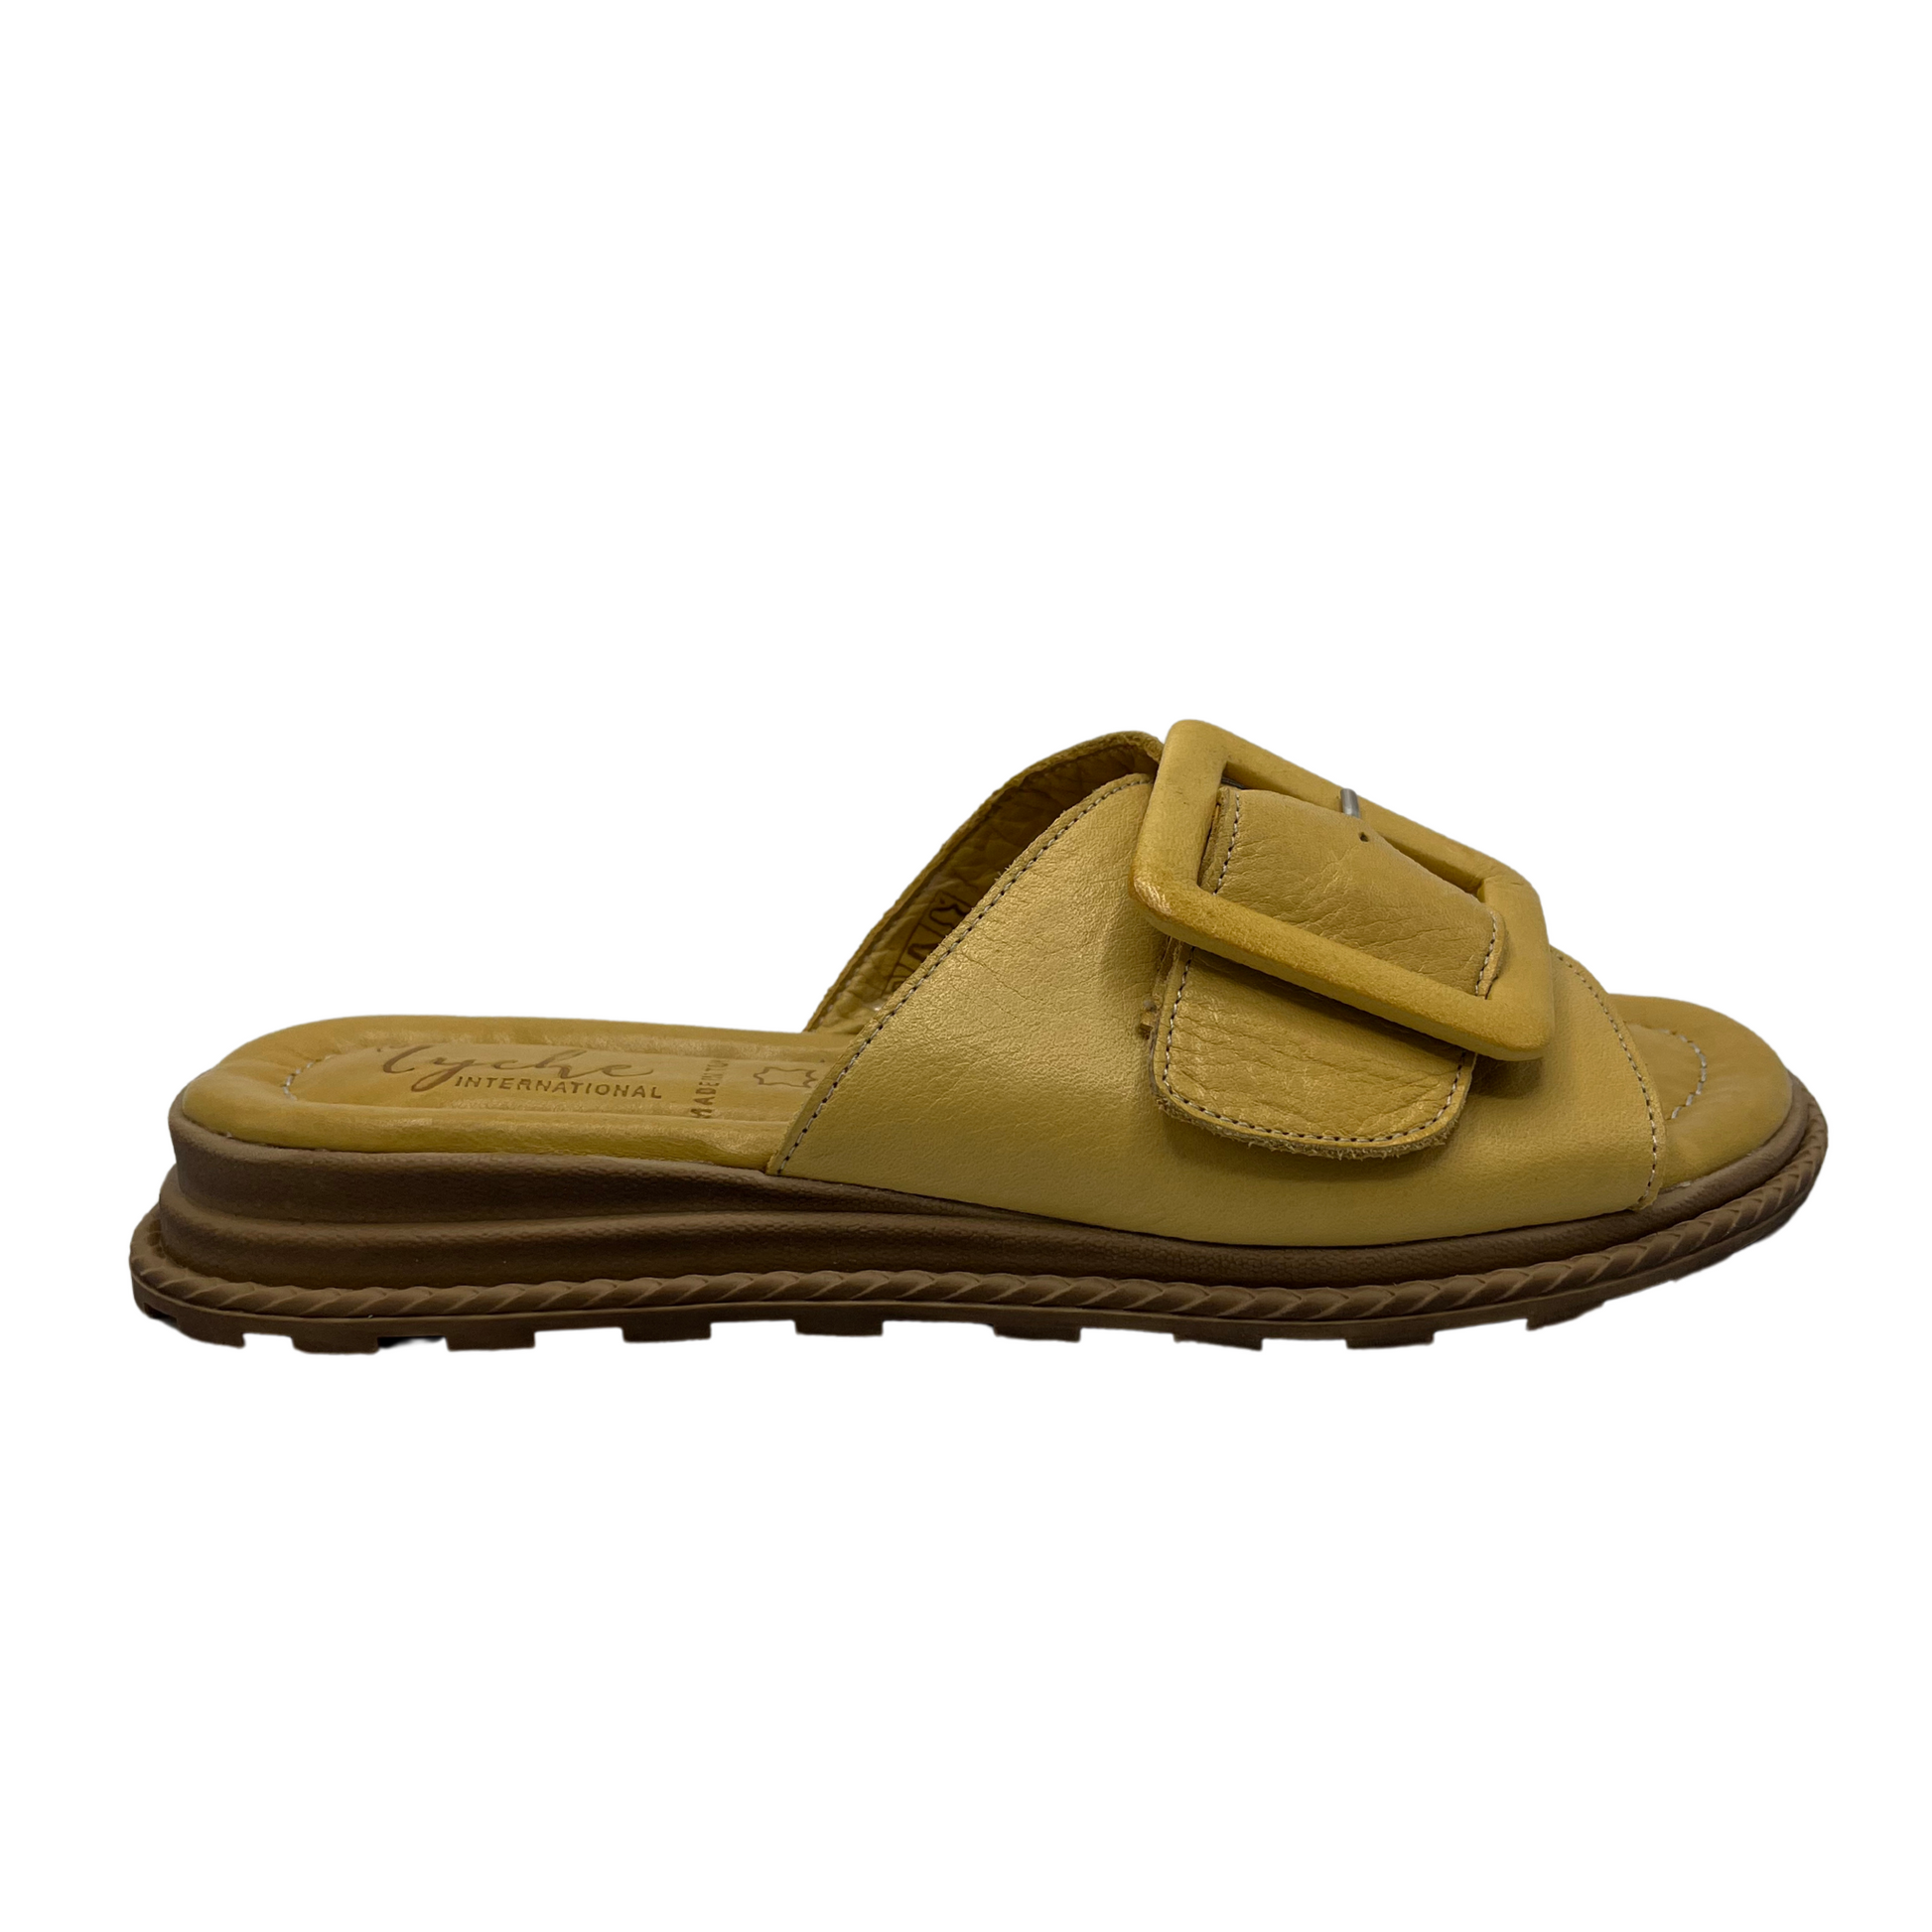 Right facing view of yellow leather sandal with oversized buckle on strap. Leather lined, cushioned footbed and open toe